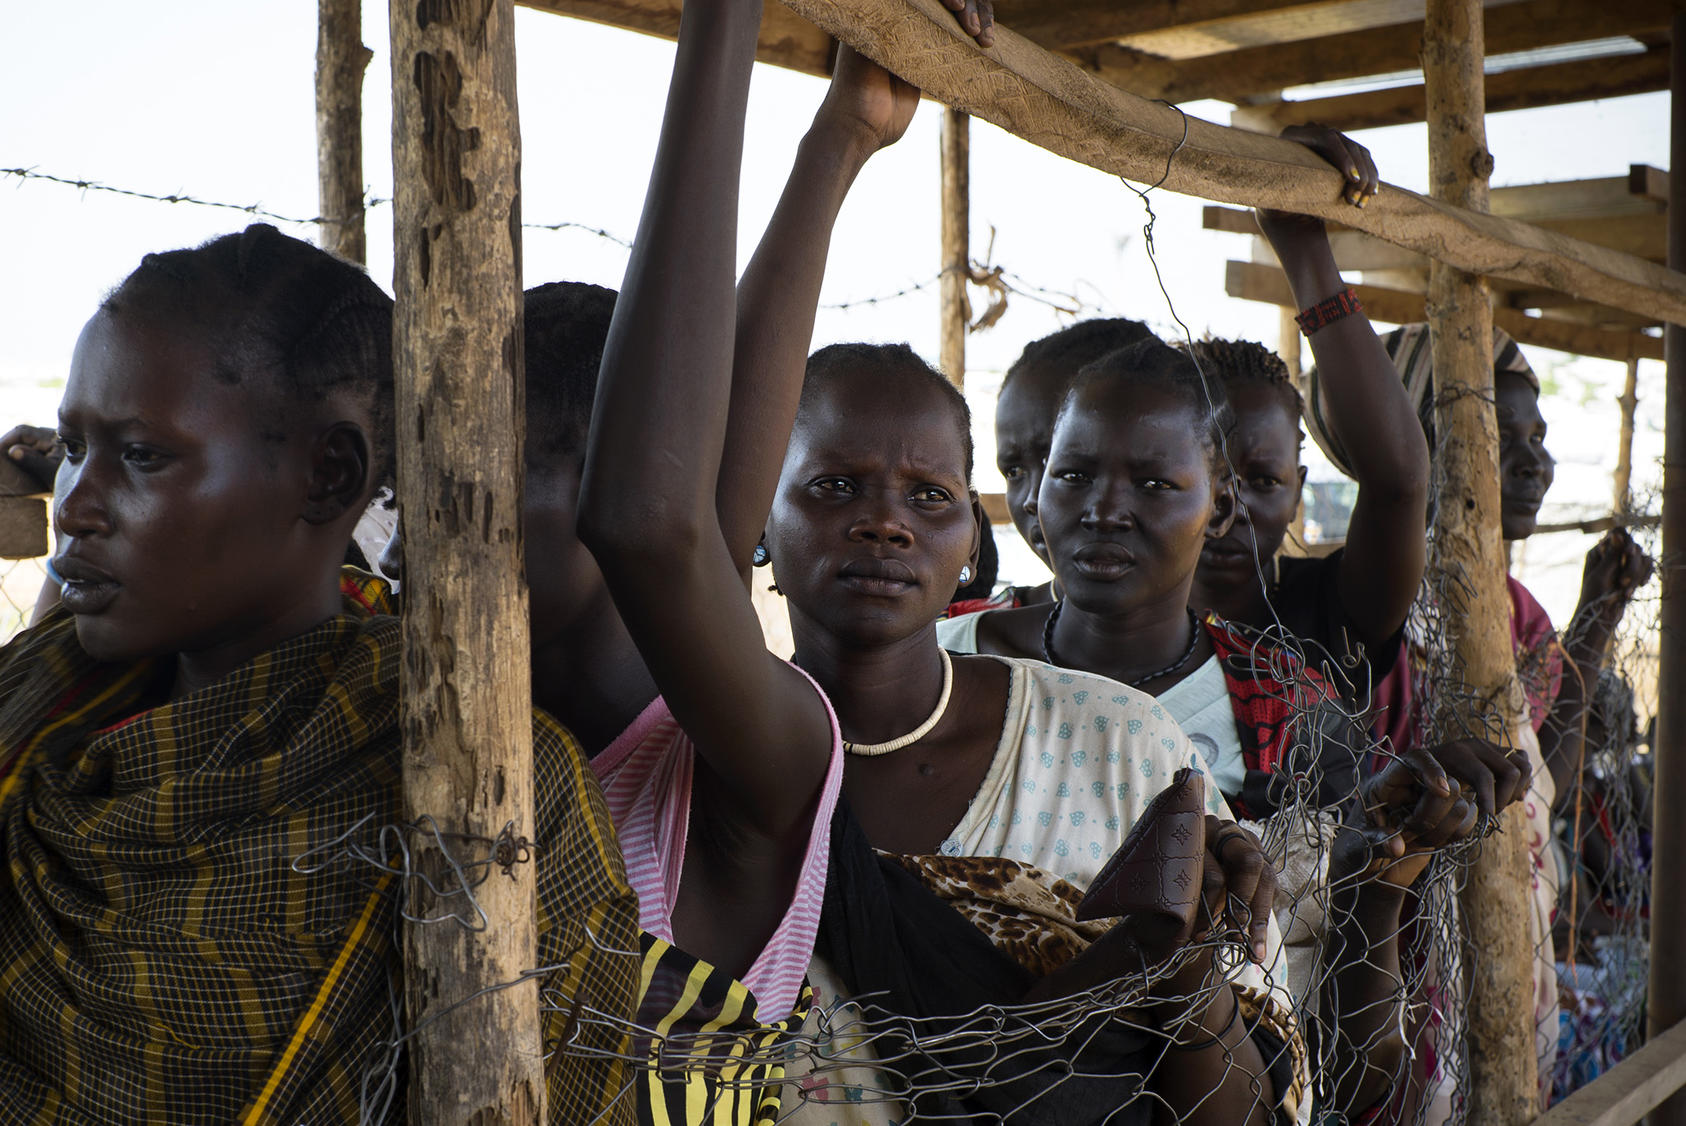 Women wait at a food distribution site in a United Nations camp outside Juba, South Sudan, similar to the cite where the Bentiu attacks occurred. (Kassie Bracken/The New York Times)